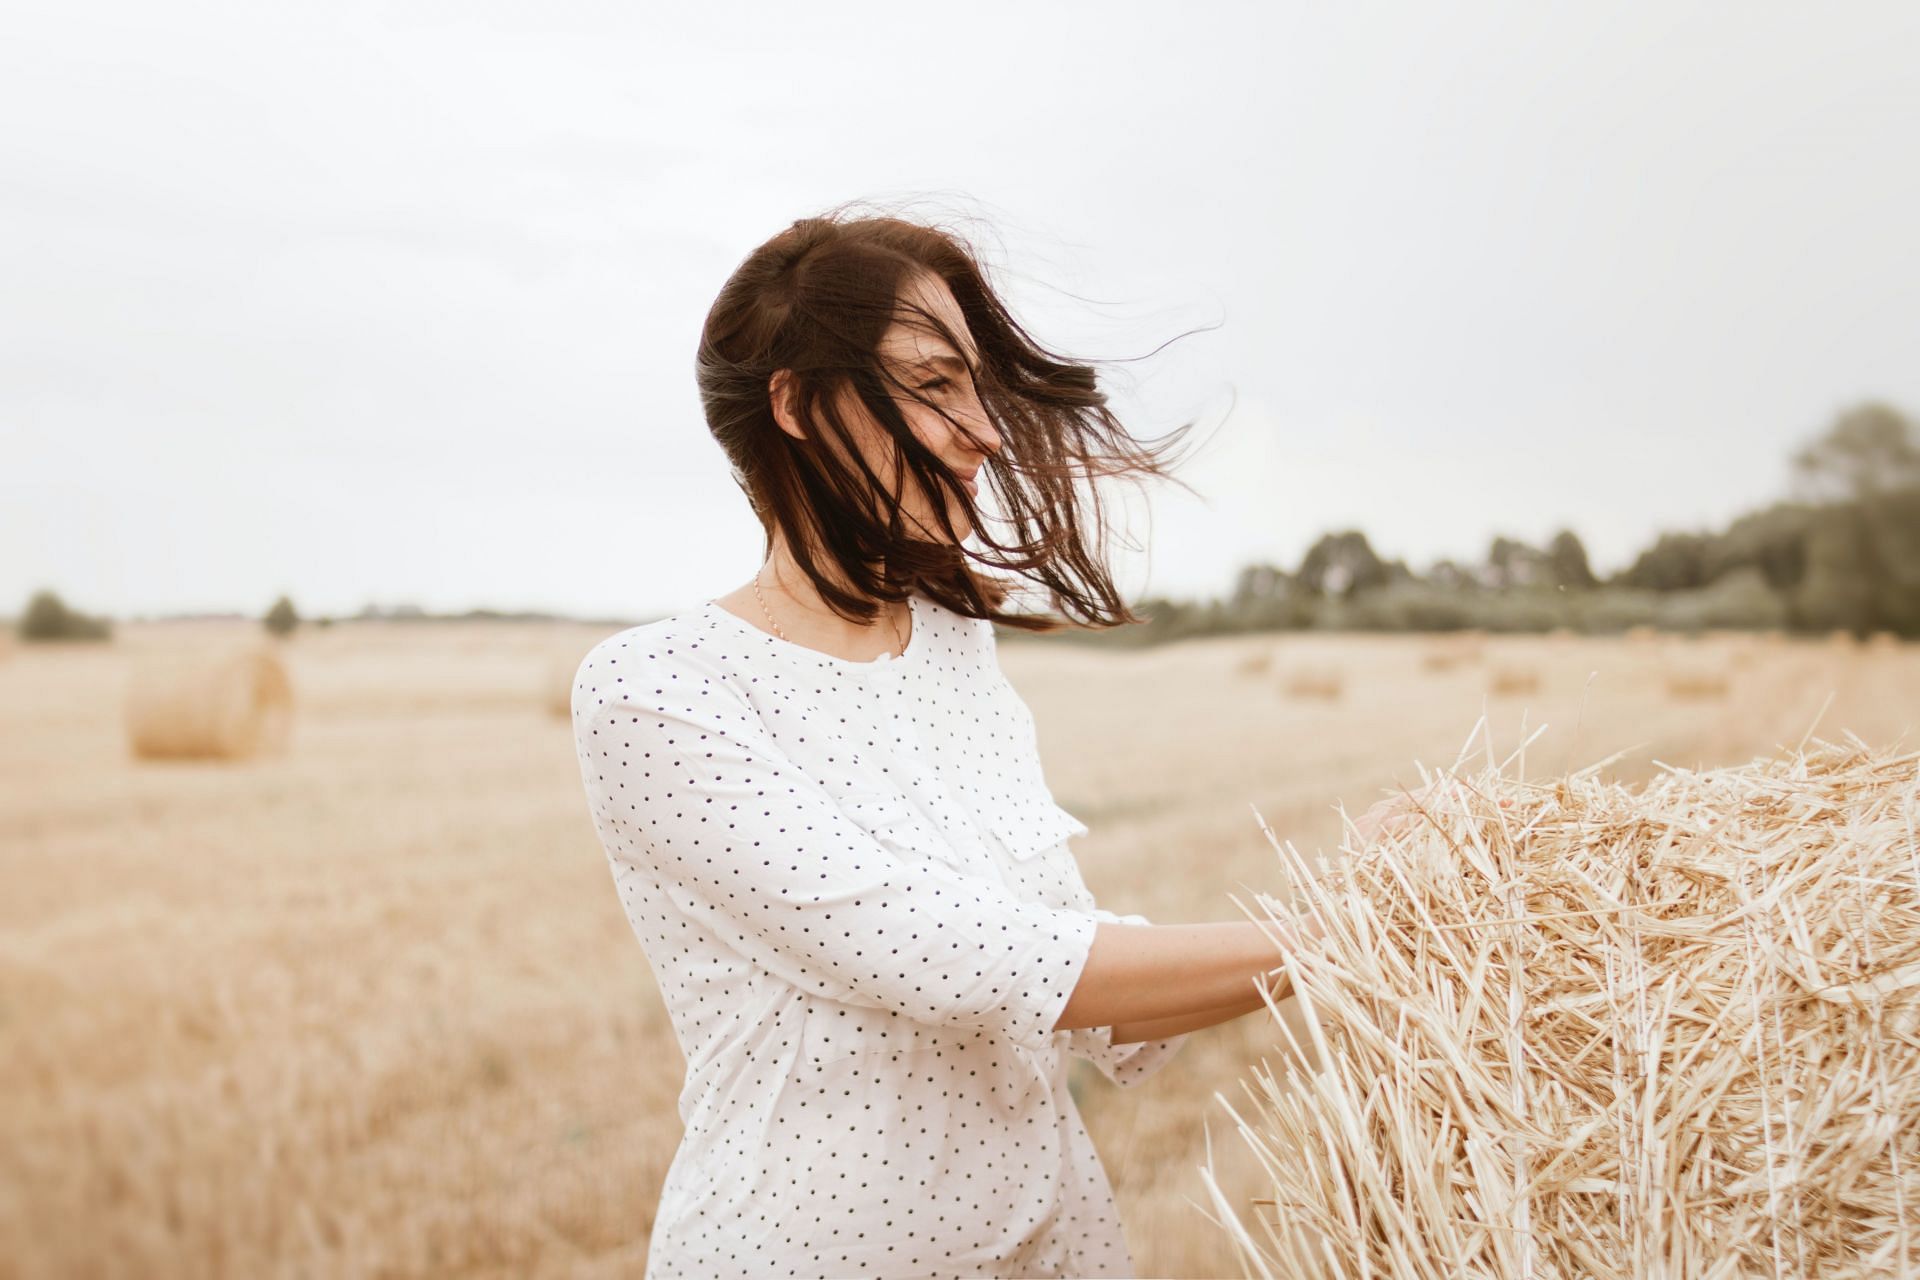 How to prevent and maintain dry hair? (Image via Pexels / dominika roseday)